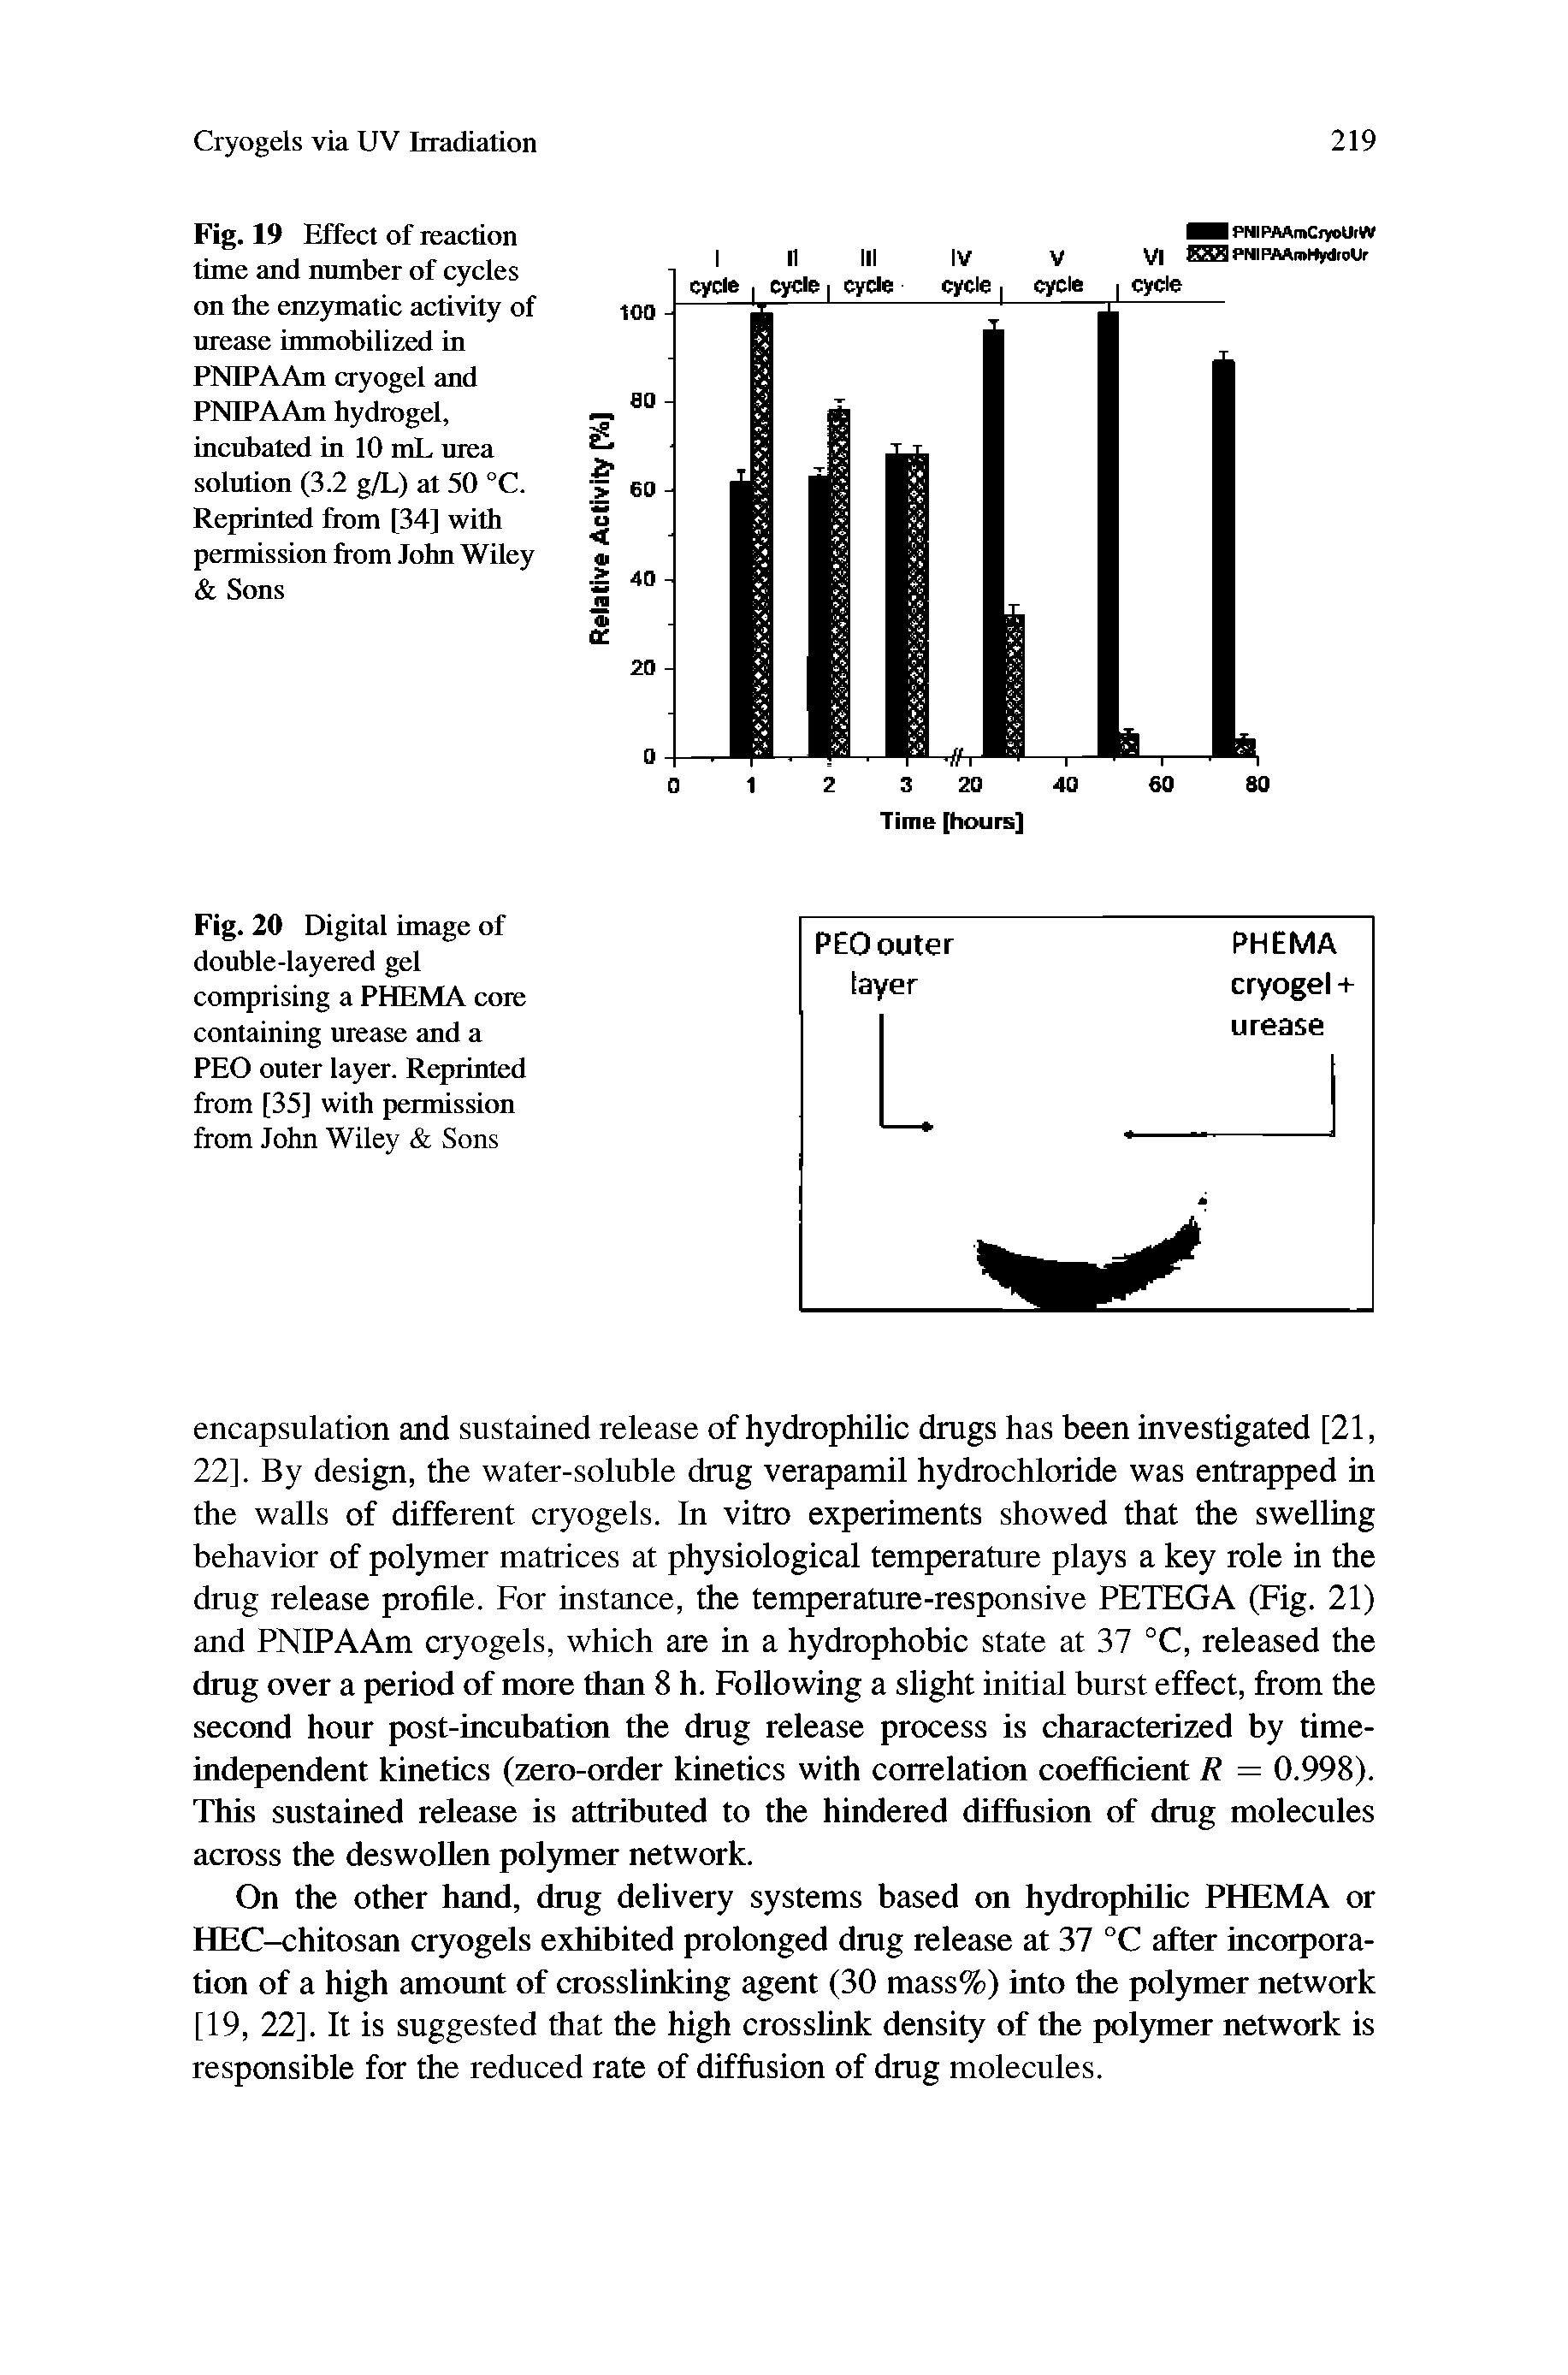 Fig. 19 Effect of reaction time and number of cycles on the enzymatic activity of urease immobilized in PNIPAAm cryogel and PNIPAAm hydrogel, incubated in 10 mL urea solution (3.2 g/L) at 50 °C. Reprinted from [34] with permission from John WUey Sons...